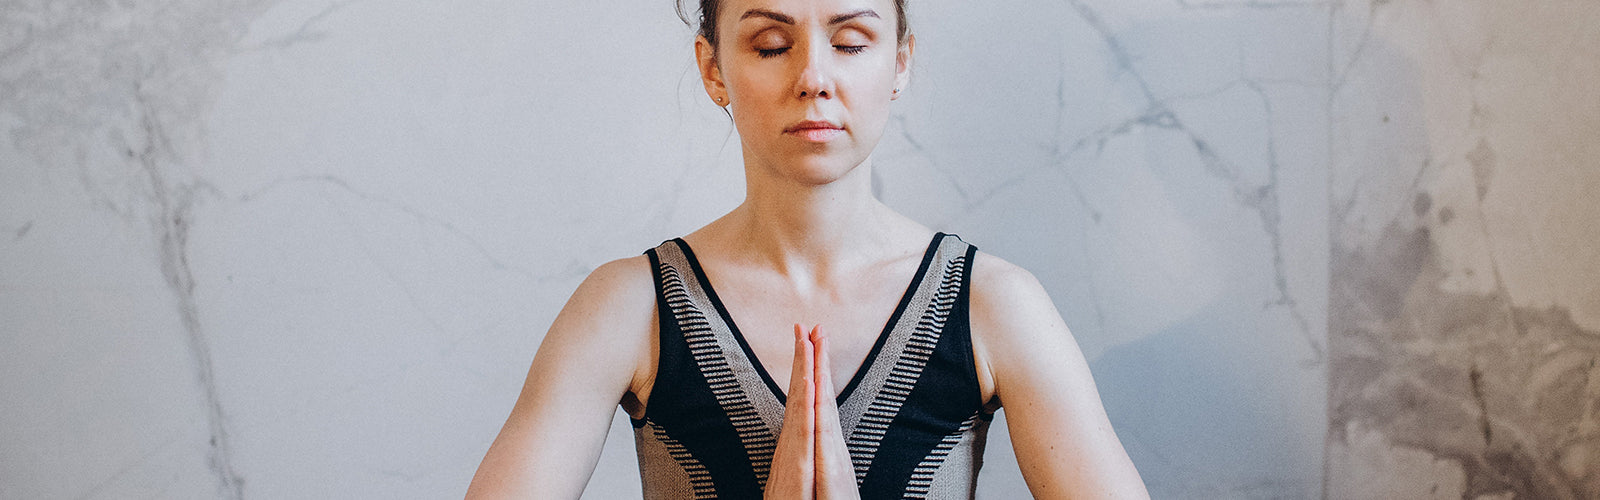 Woman sitting and meditating with hands together